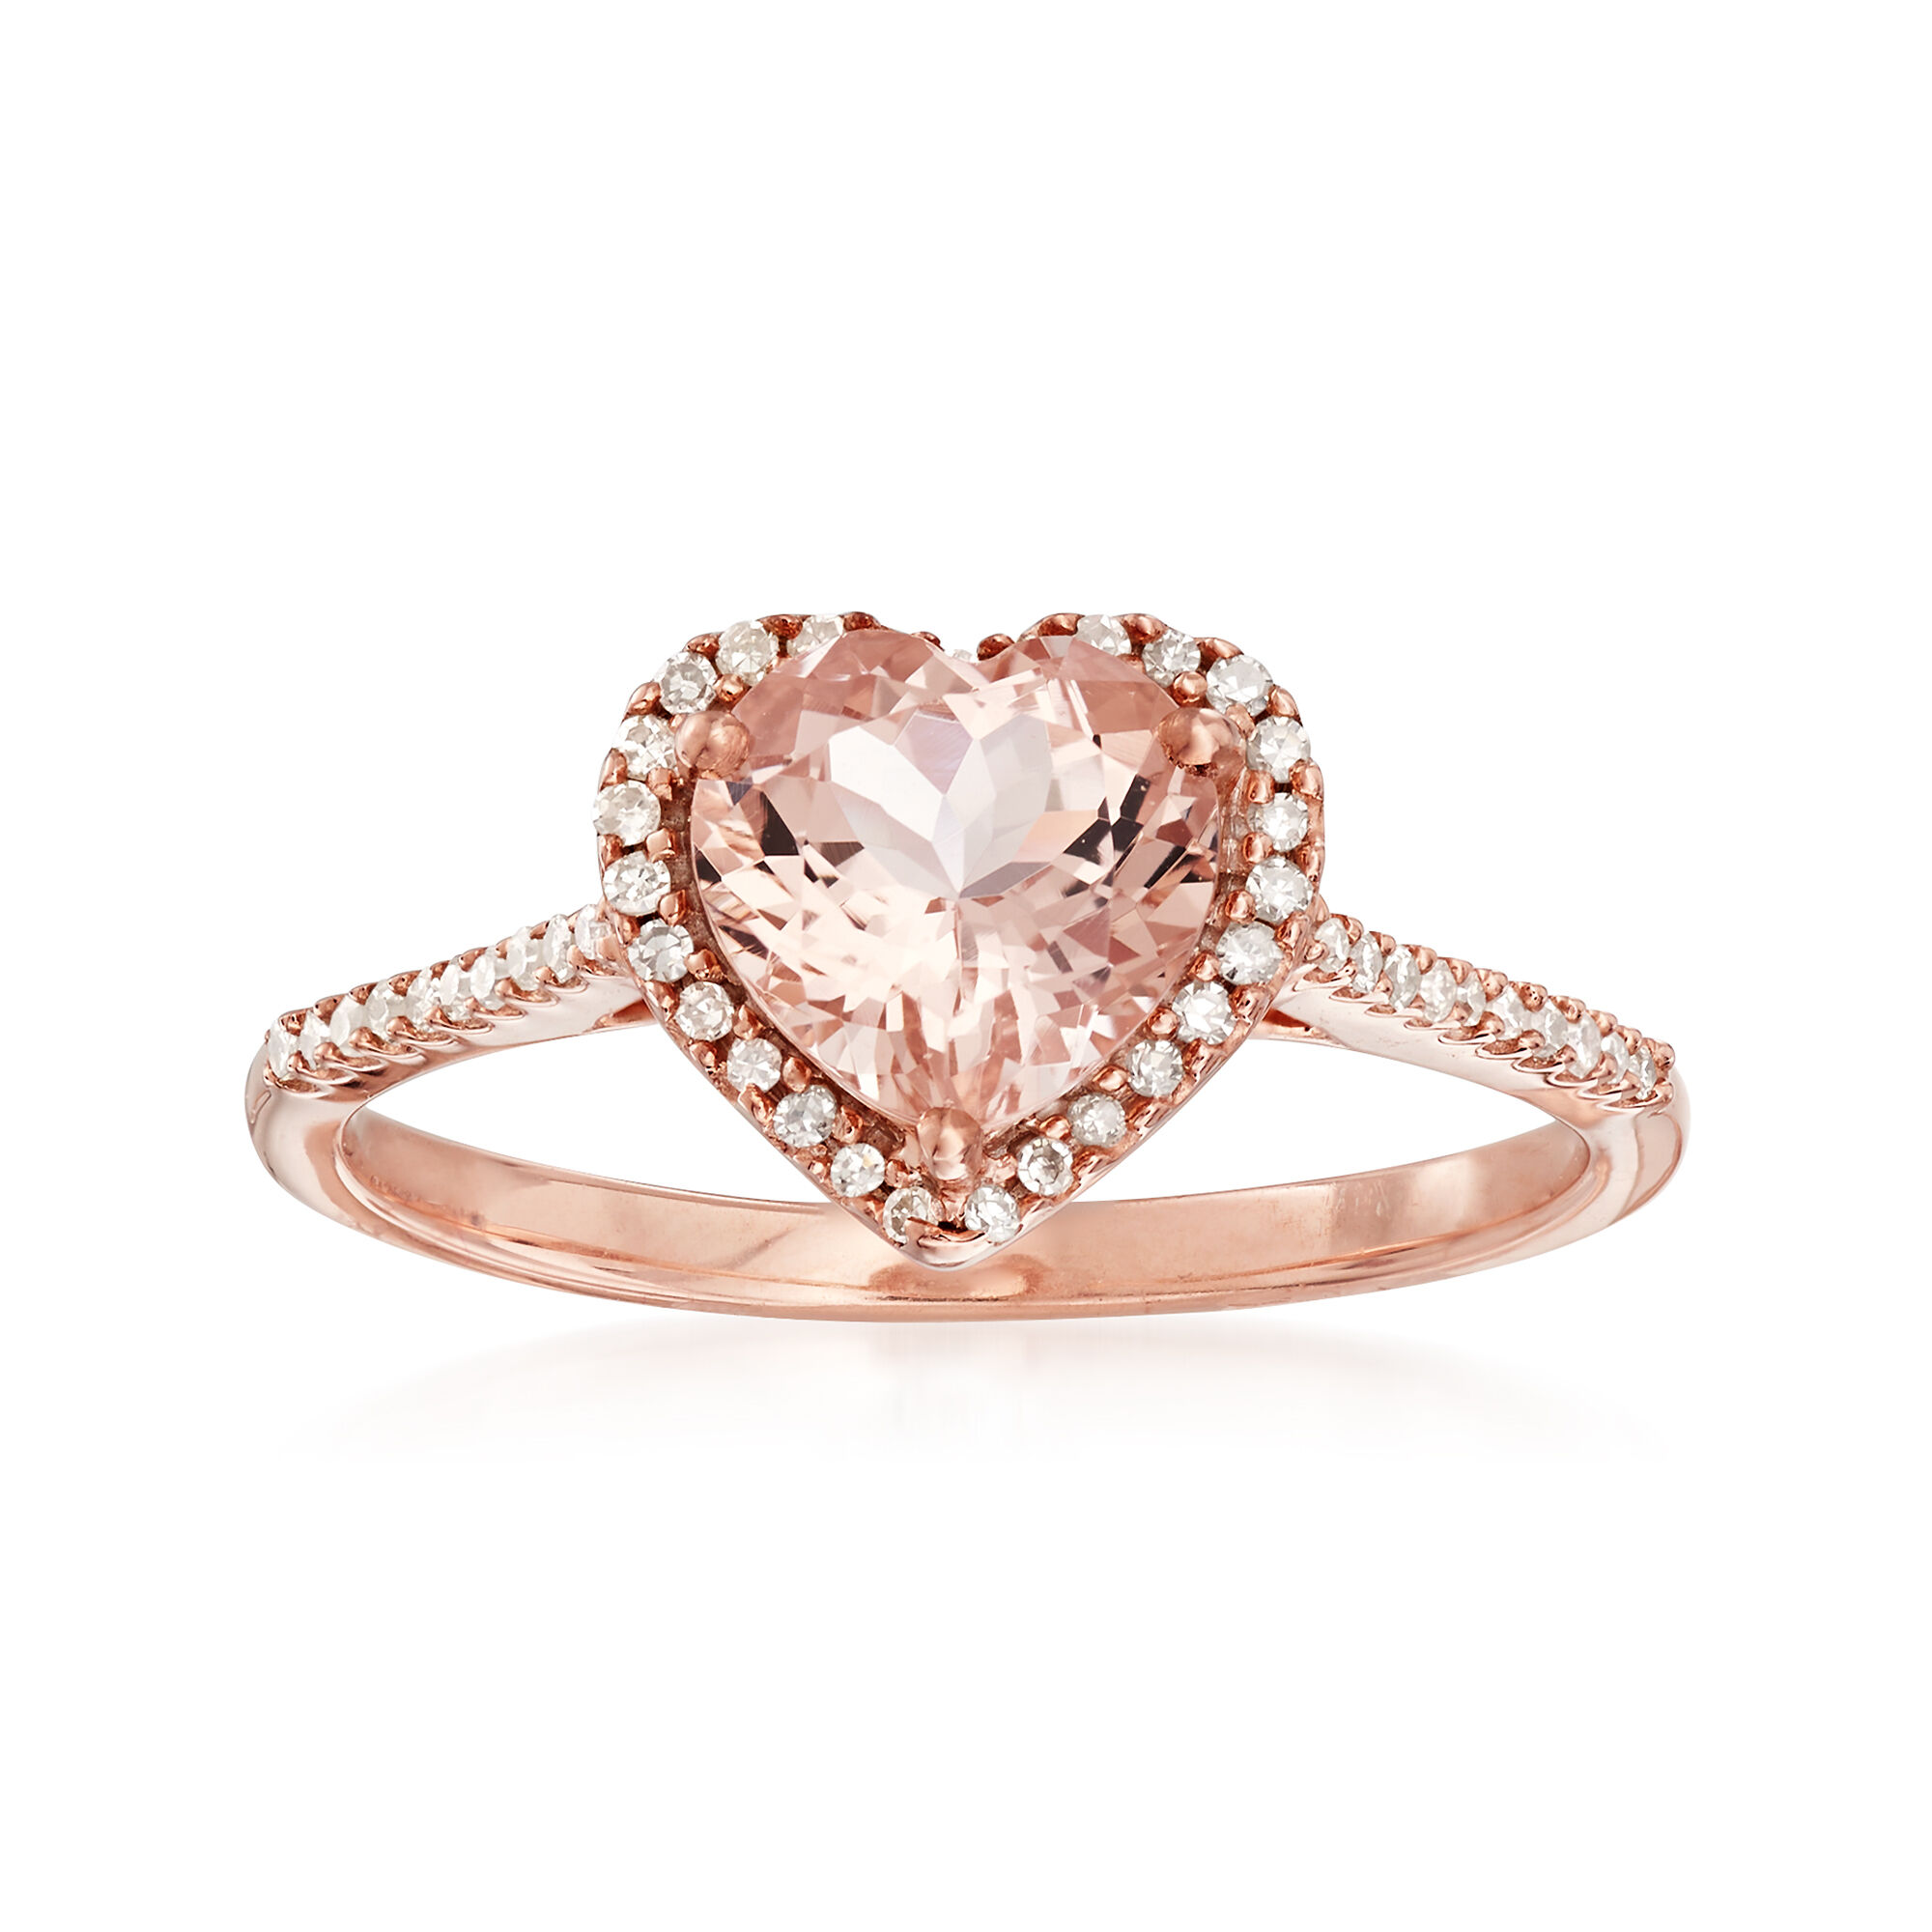 1.00CT Round Cut Peach Morganite Engagement Ring Set in 14K Rose Gold Over